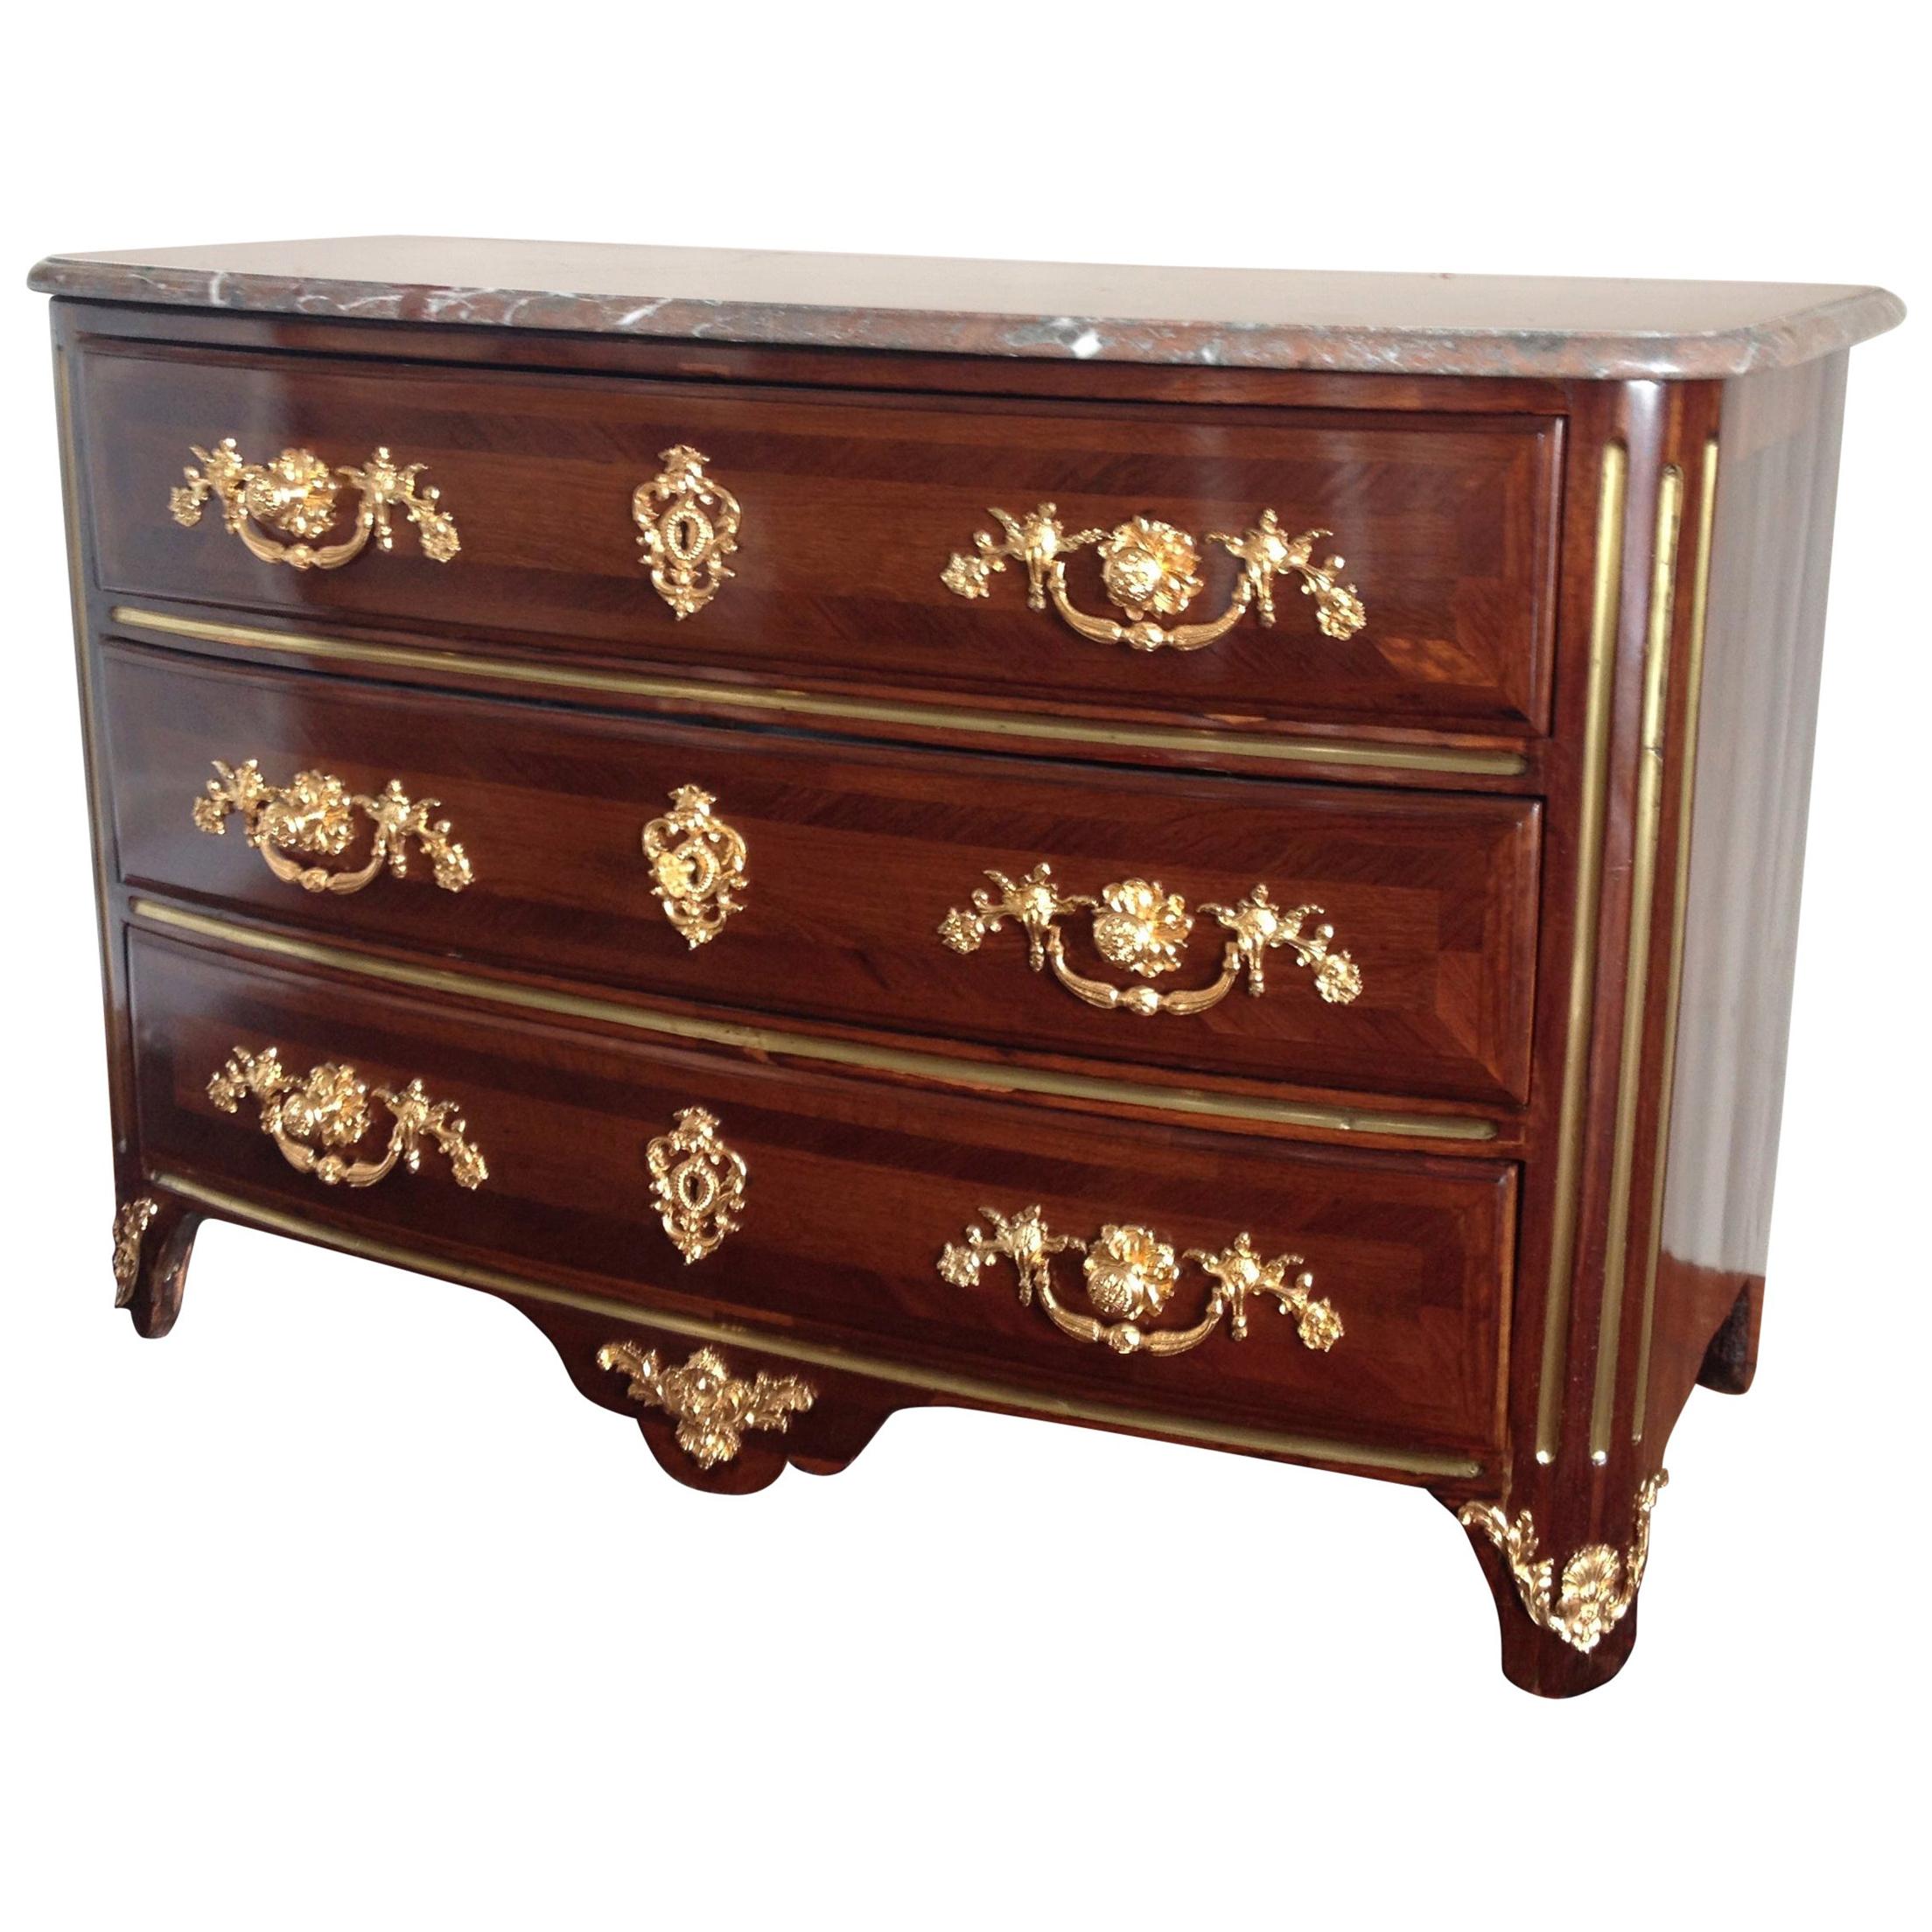 18th C. Louis XIV Style Ormolu Mounted Bronze Commode or French Chest of Drawers